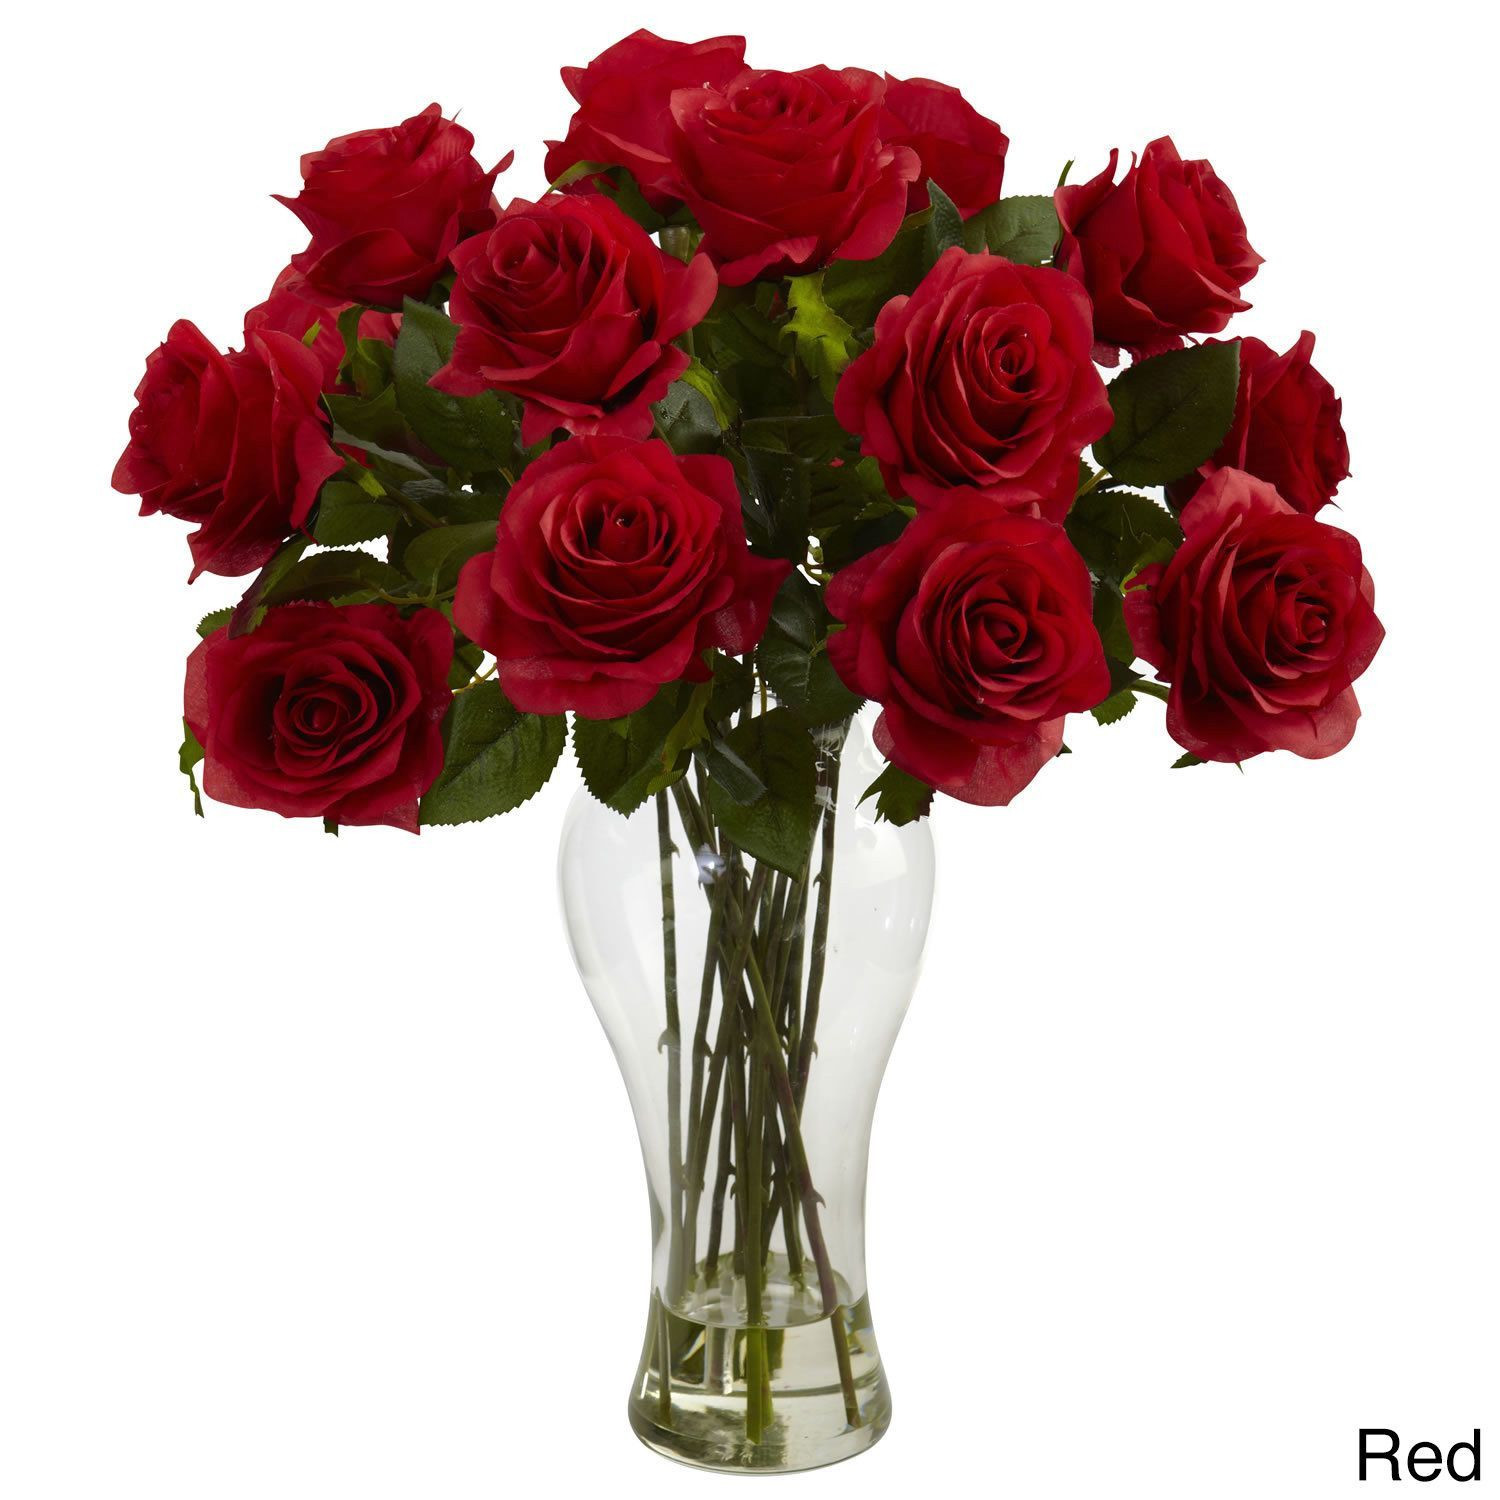 25 attractive Vase and Faux Flowers 2023 free download vase and faux flowers of nearly natural blooming roses vase blooming roses w vase red with regard to nearly natural blooming roses vase blooming roses w vase red plastic